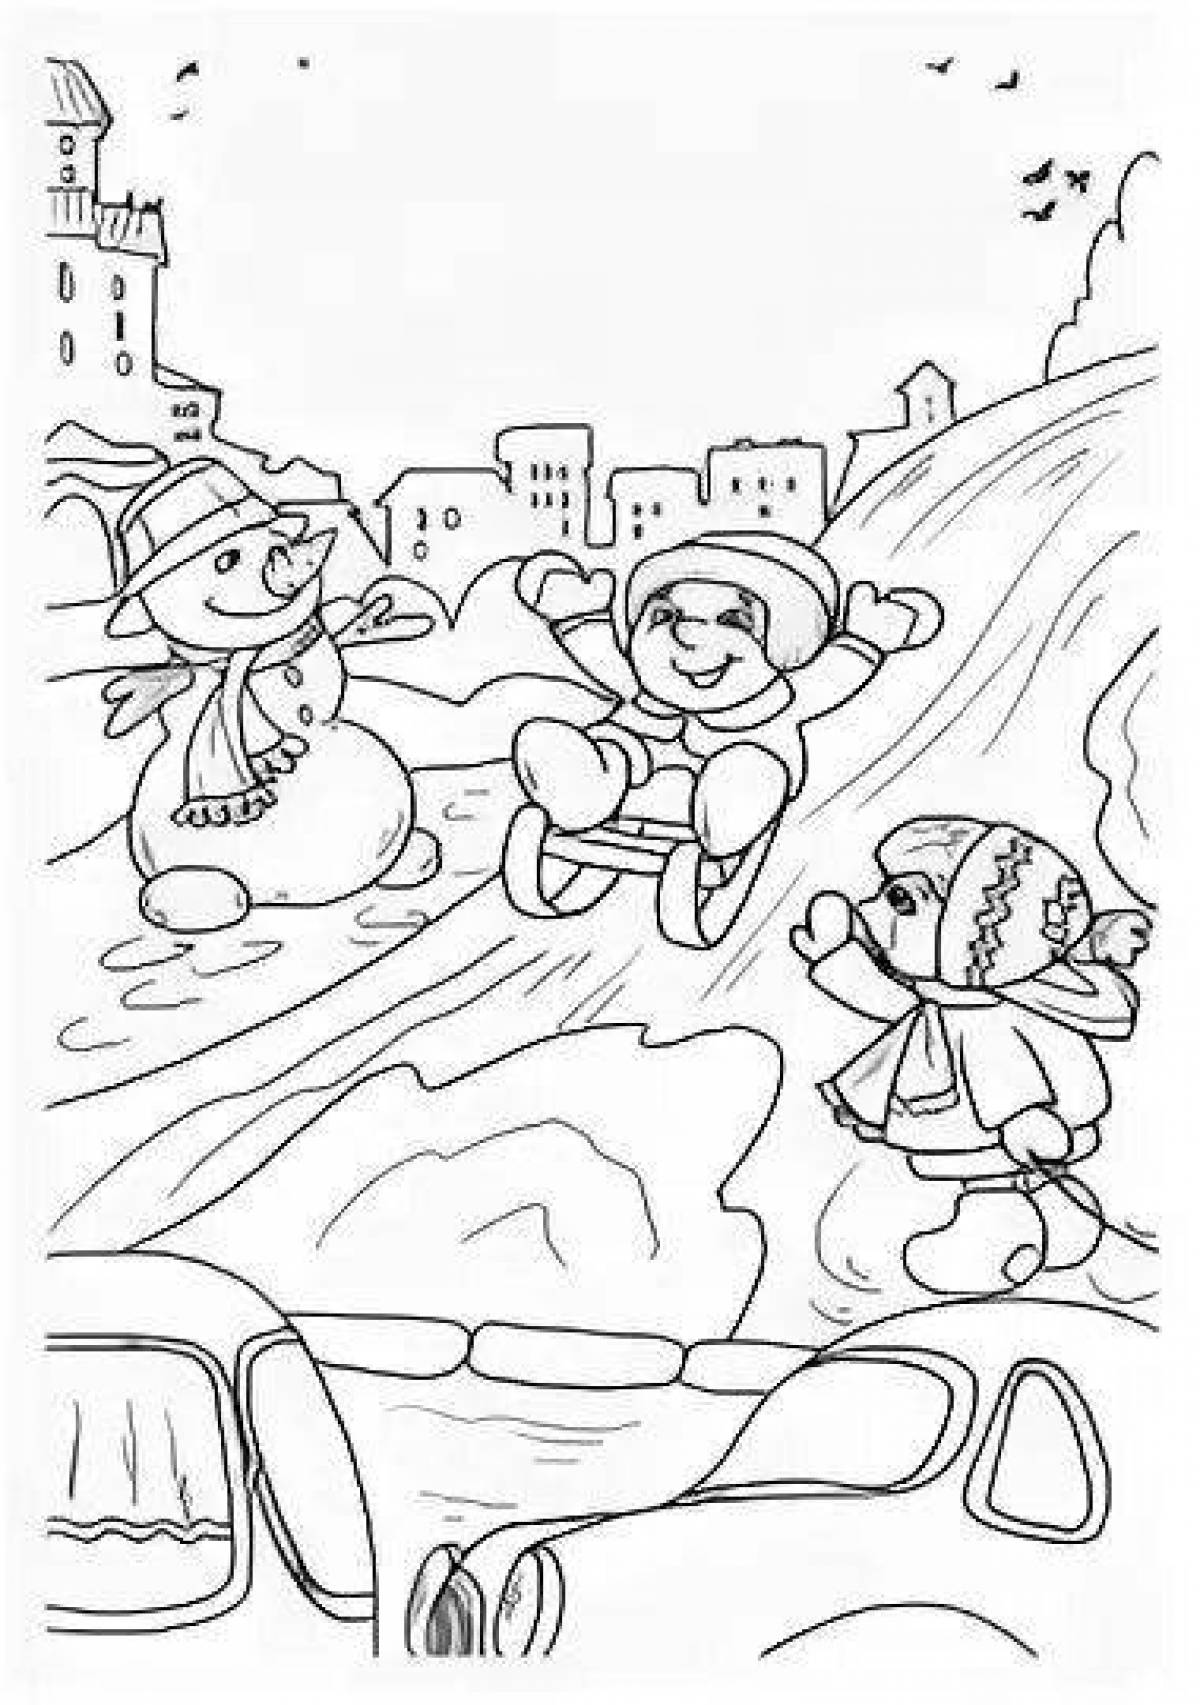 Comic winter safety coloring page